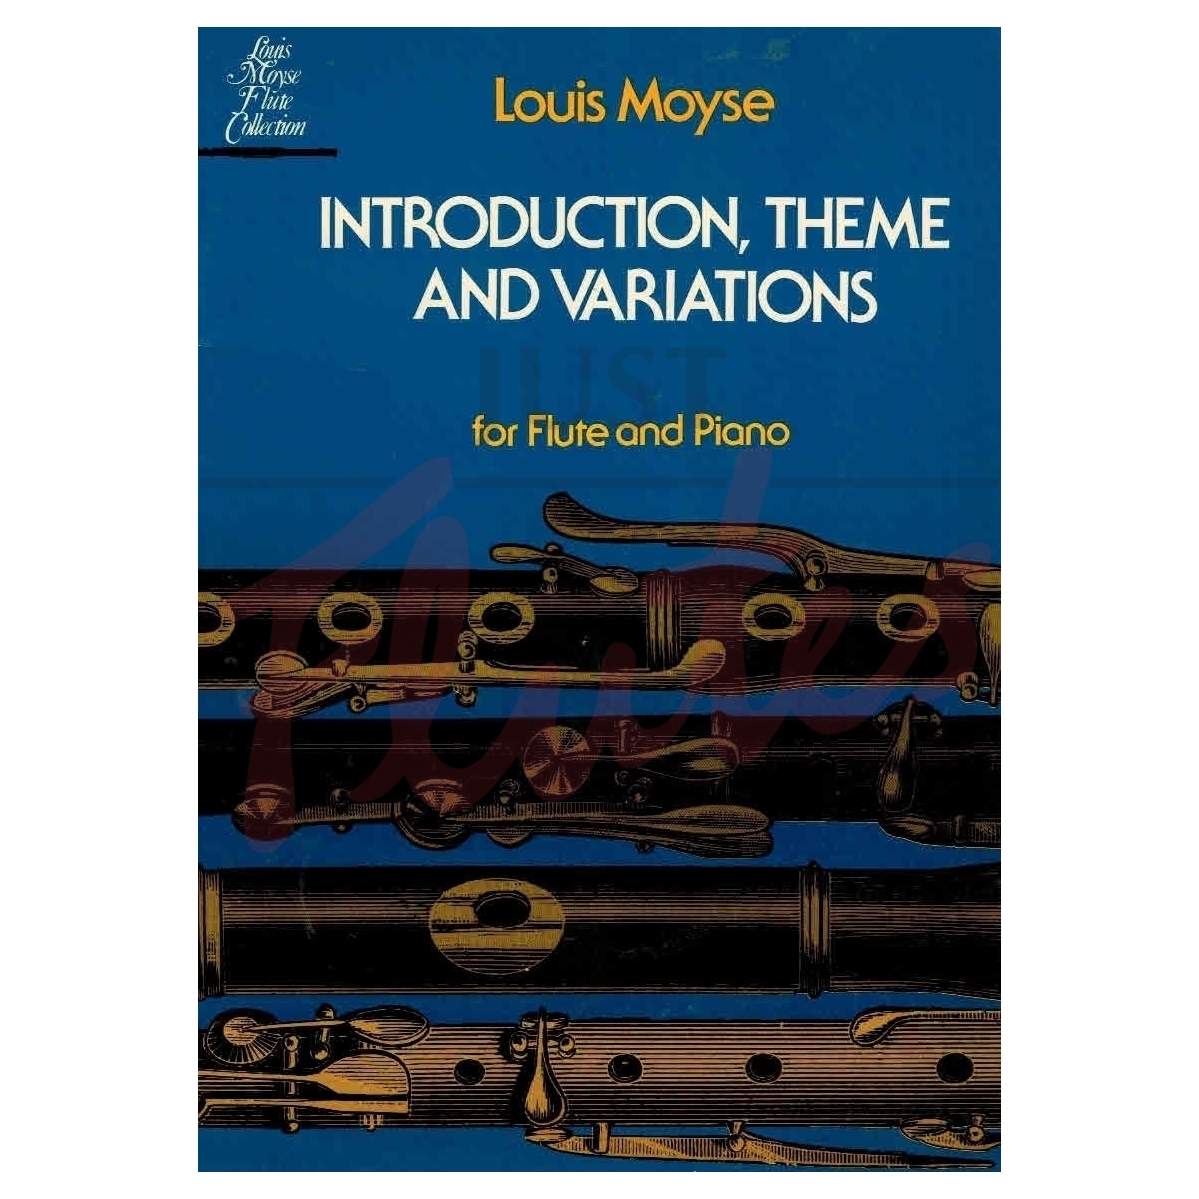 Introduction, Theme and Variations